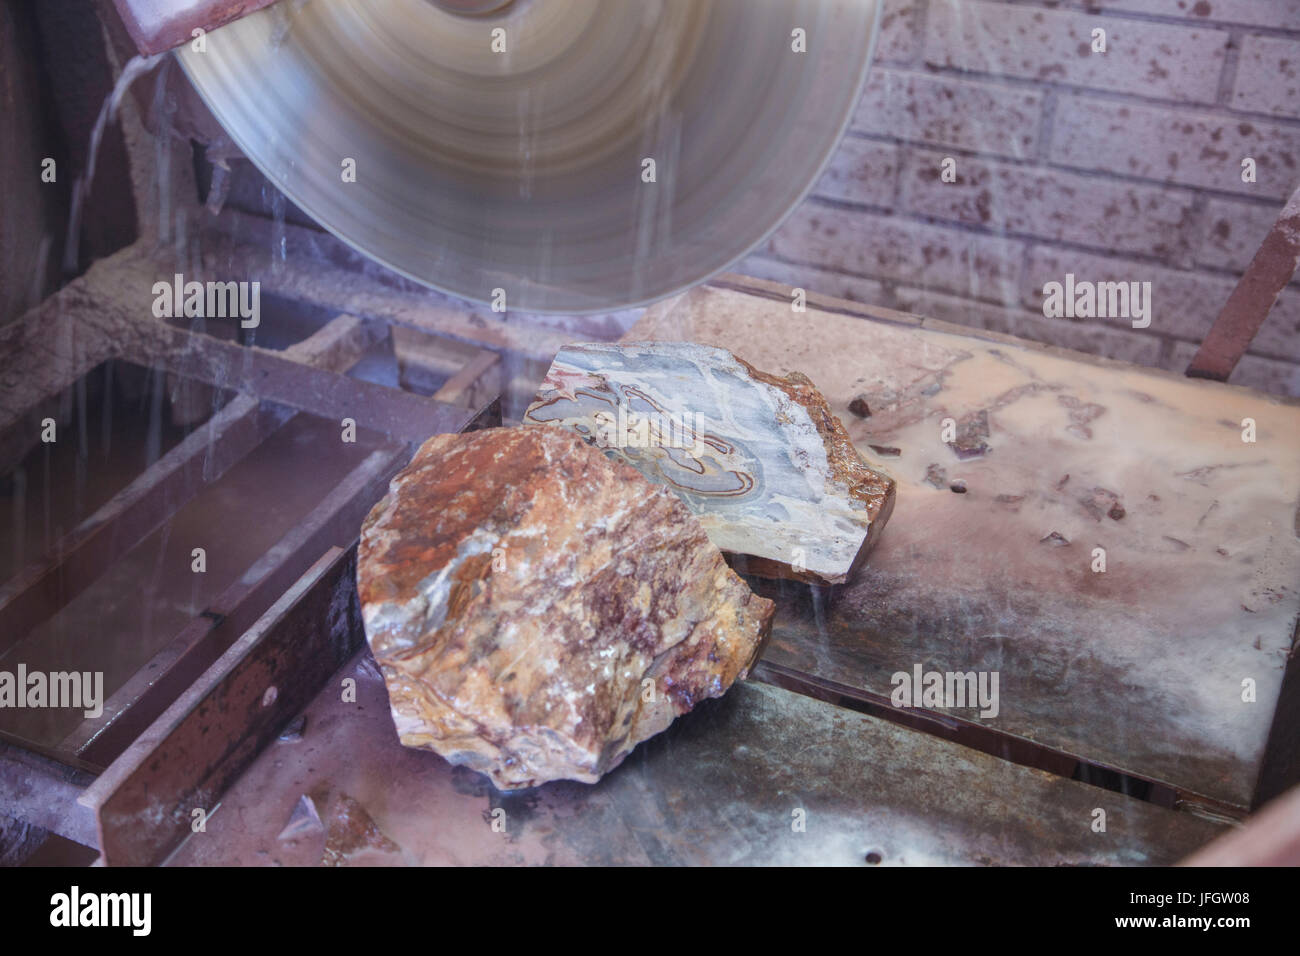 Chile, Combarbala, Fairly Trade, figures from bacon stone, production, sawing Stock Photo